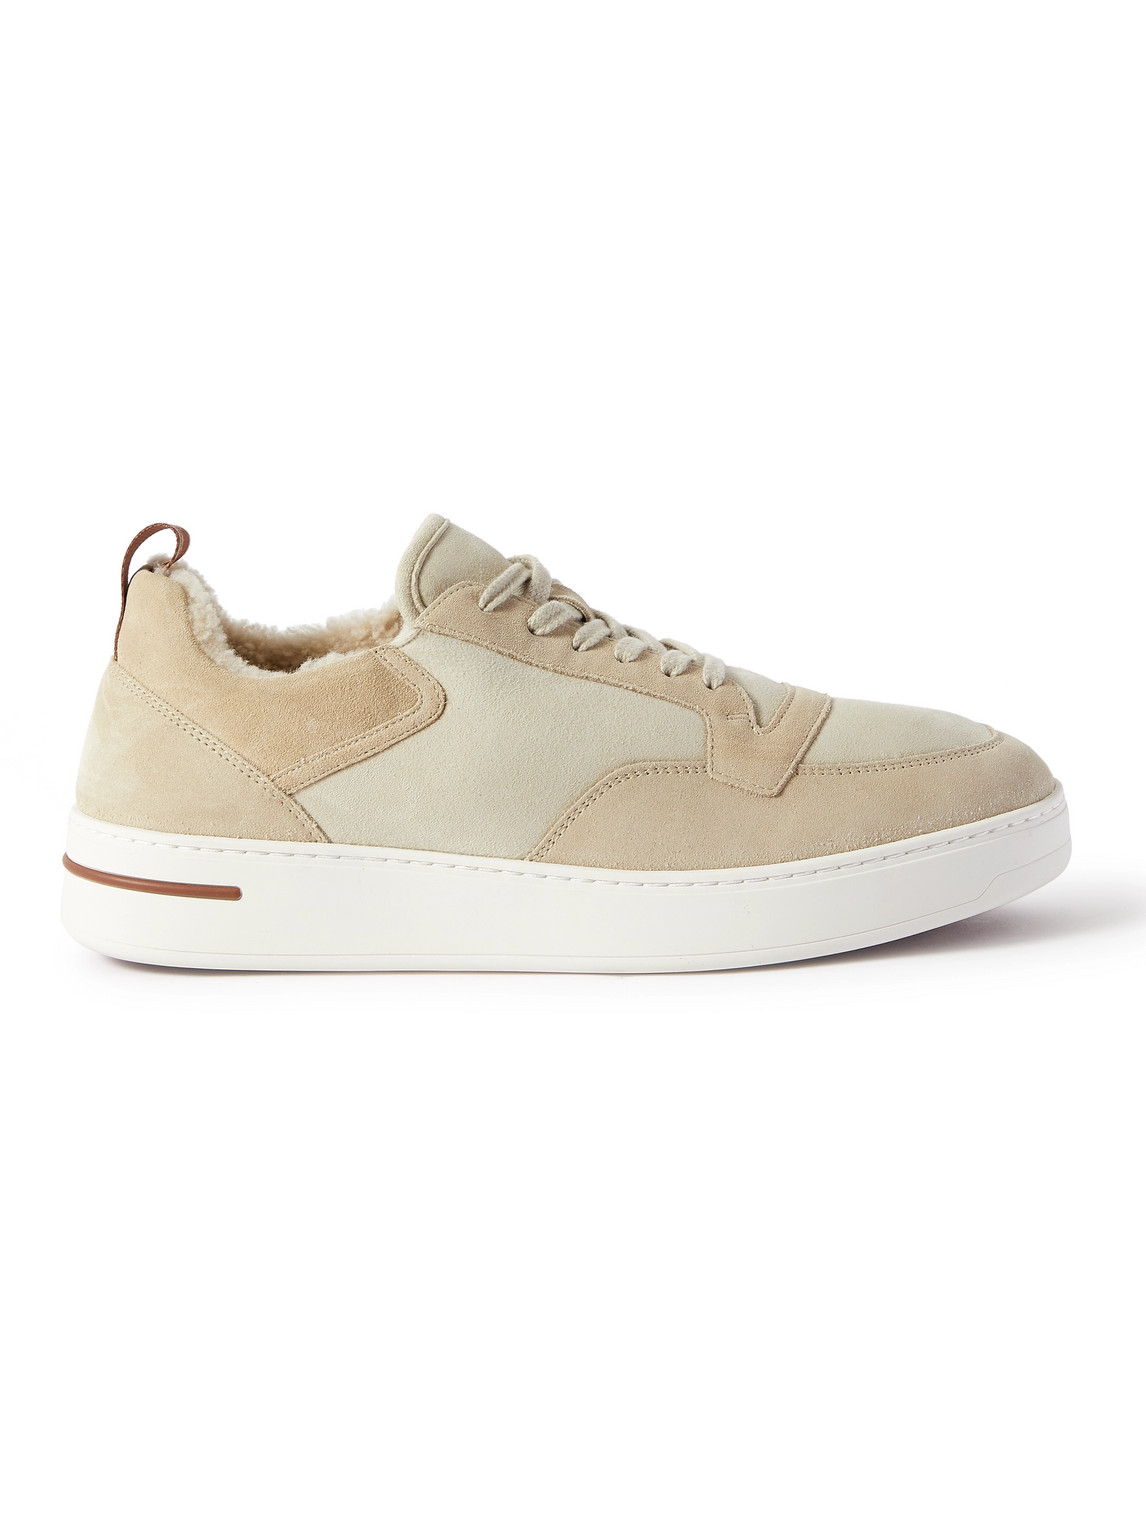 Newport Shearling-Trimmed Two-Tone Suede Sneakers